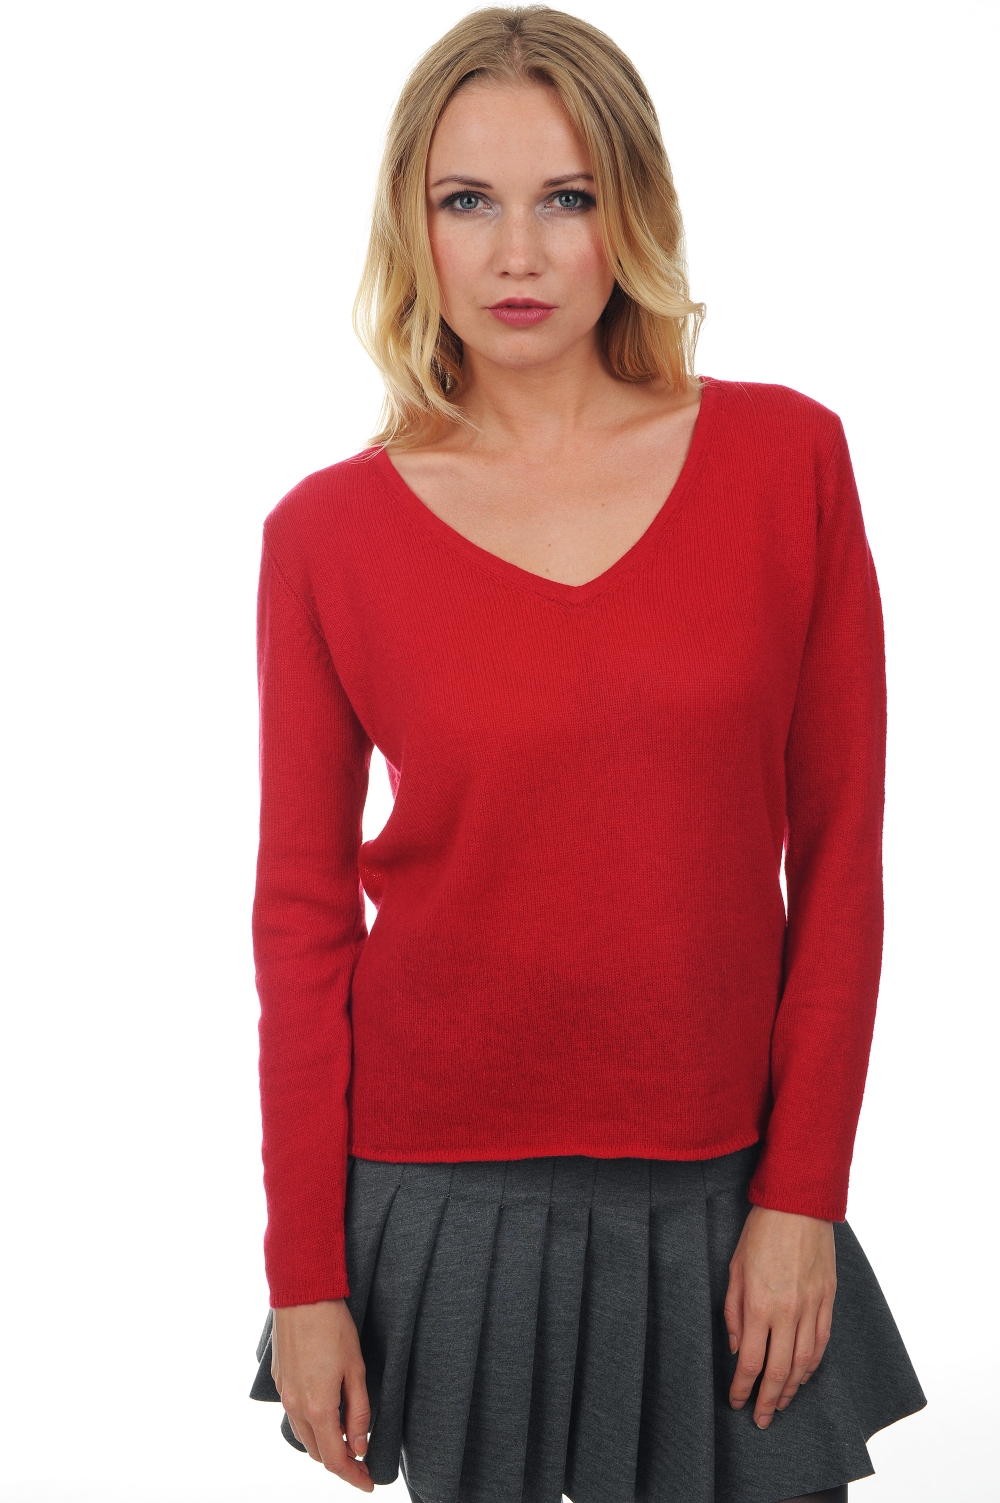 Cashmere ladies timeless classics flavie blood red m